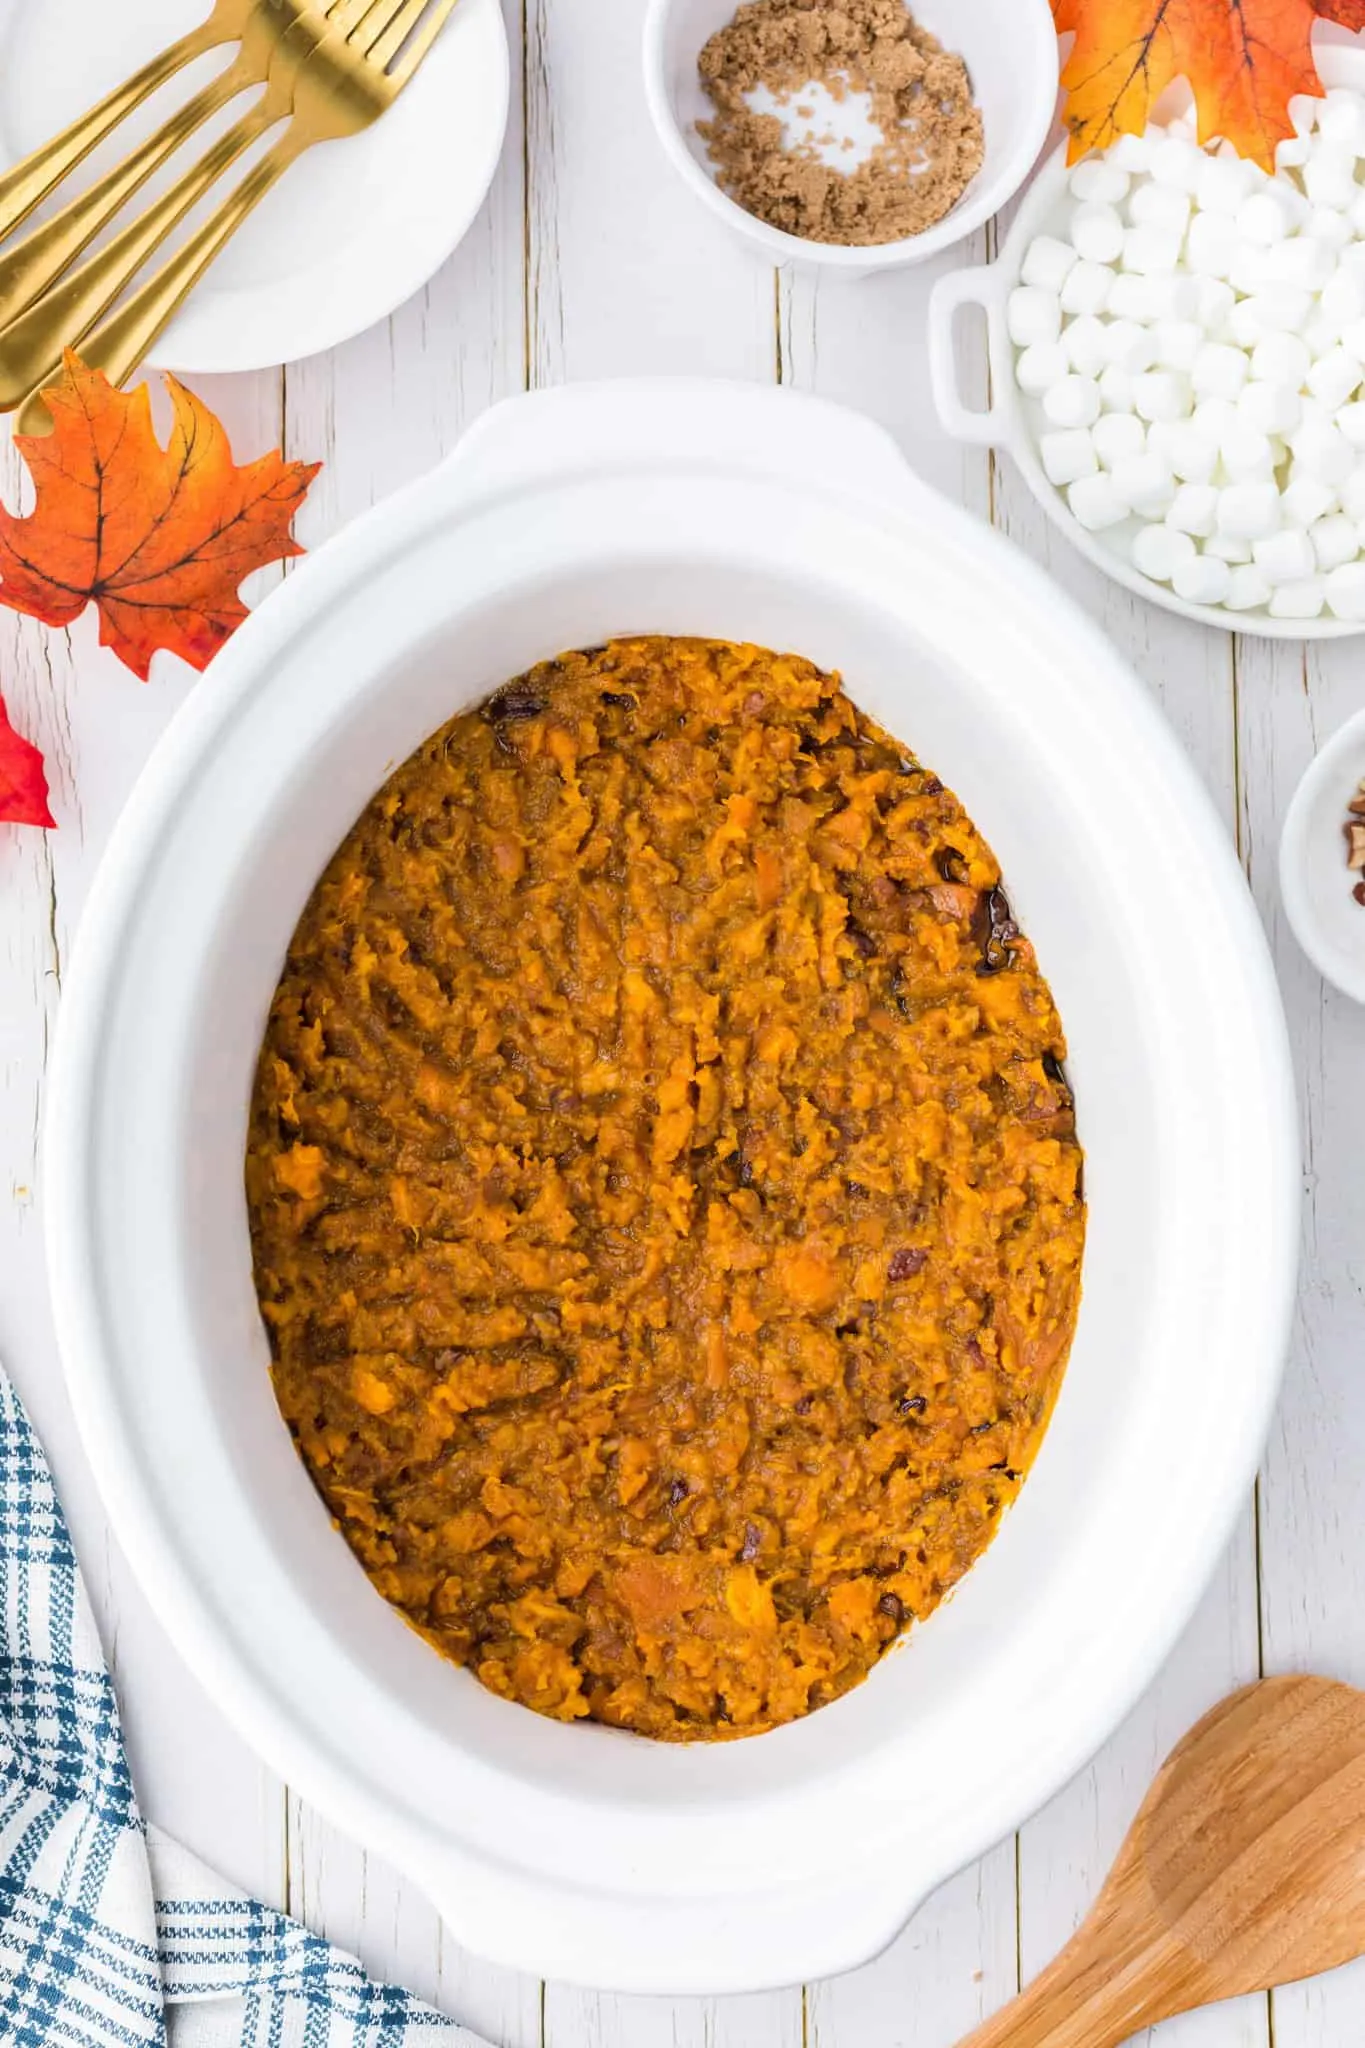 mashed sweet potato and brown sugar mixture in a crock pot